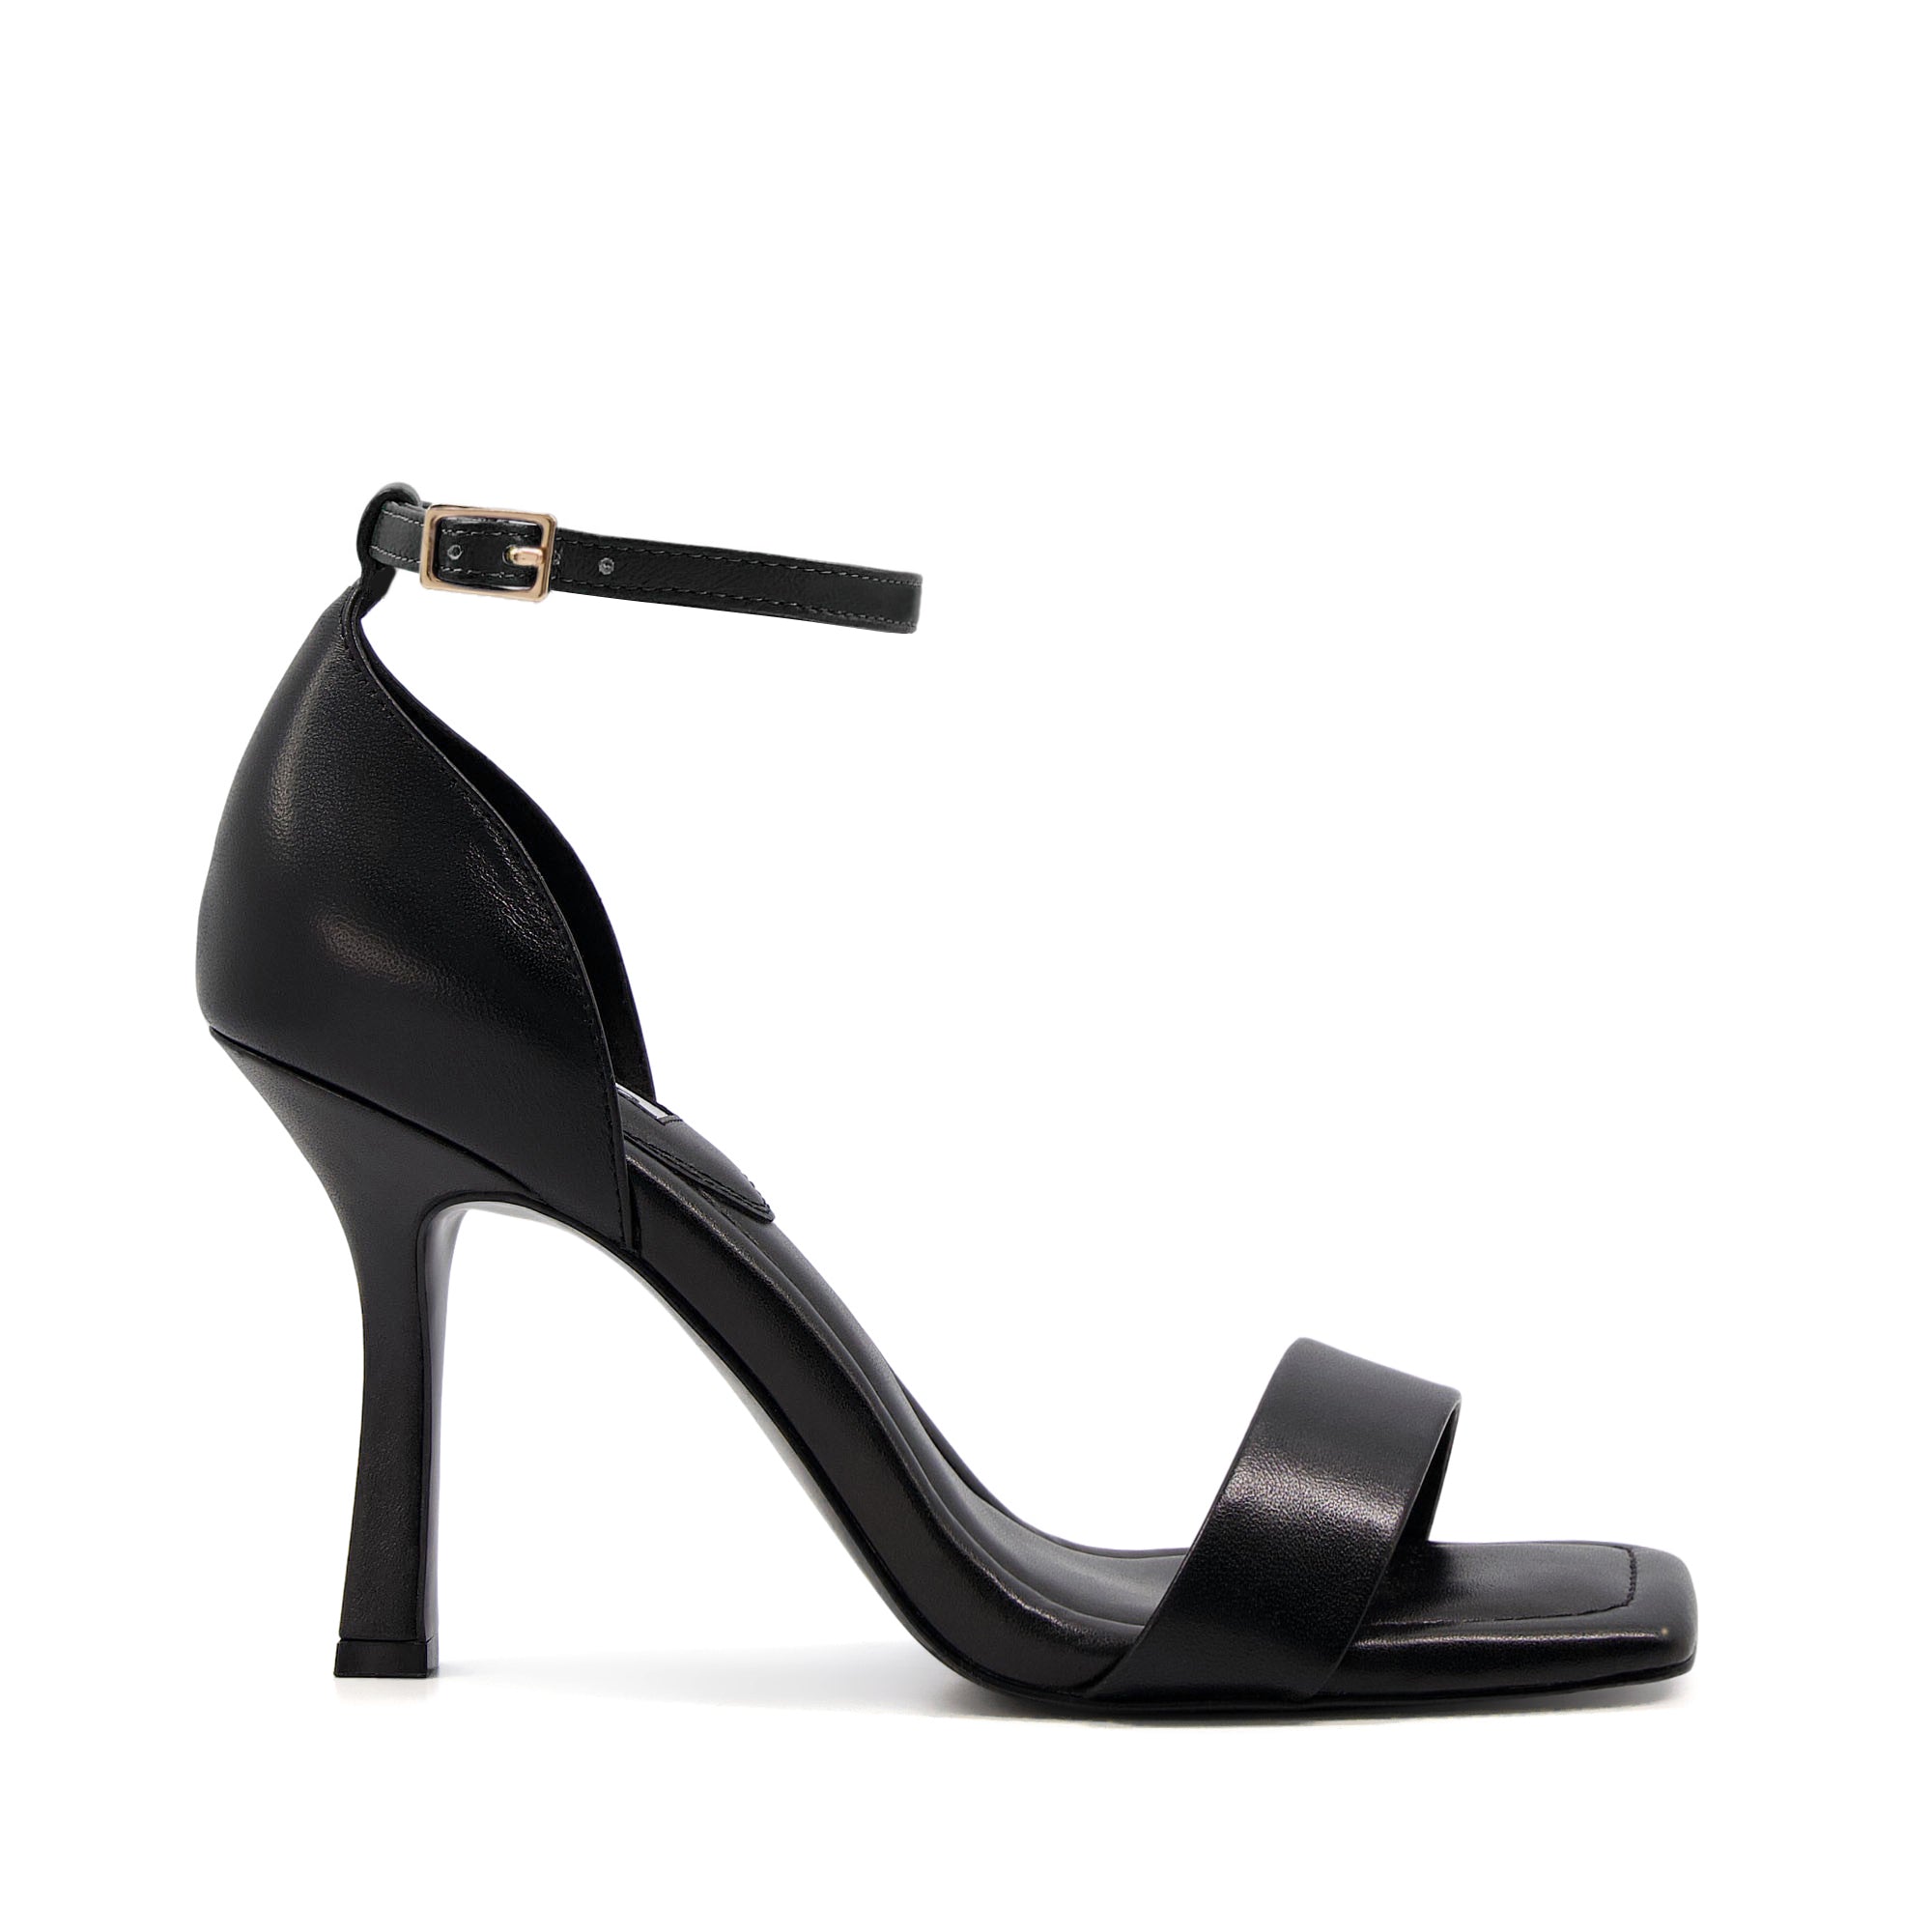 MOTIVATE - Square Toe Heeled Leather Sandals